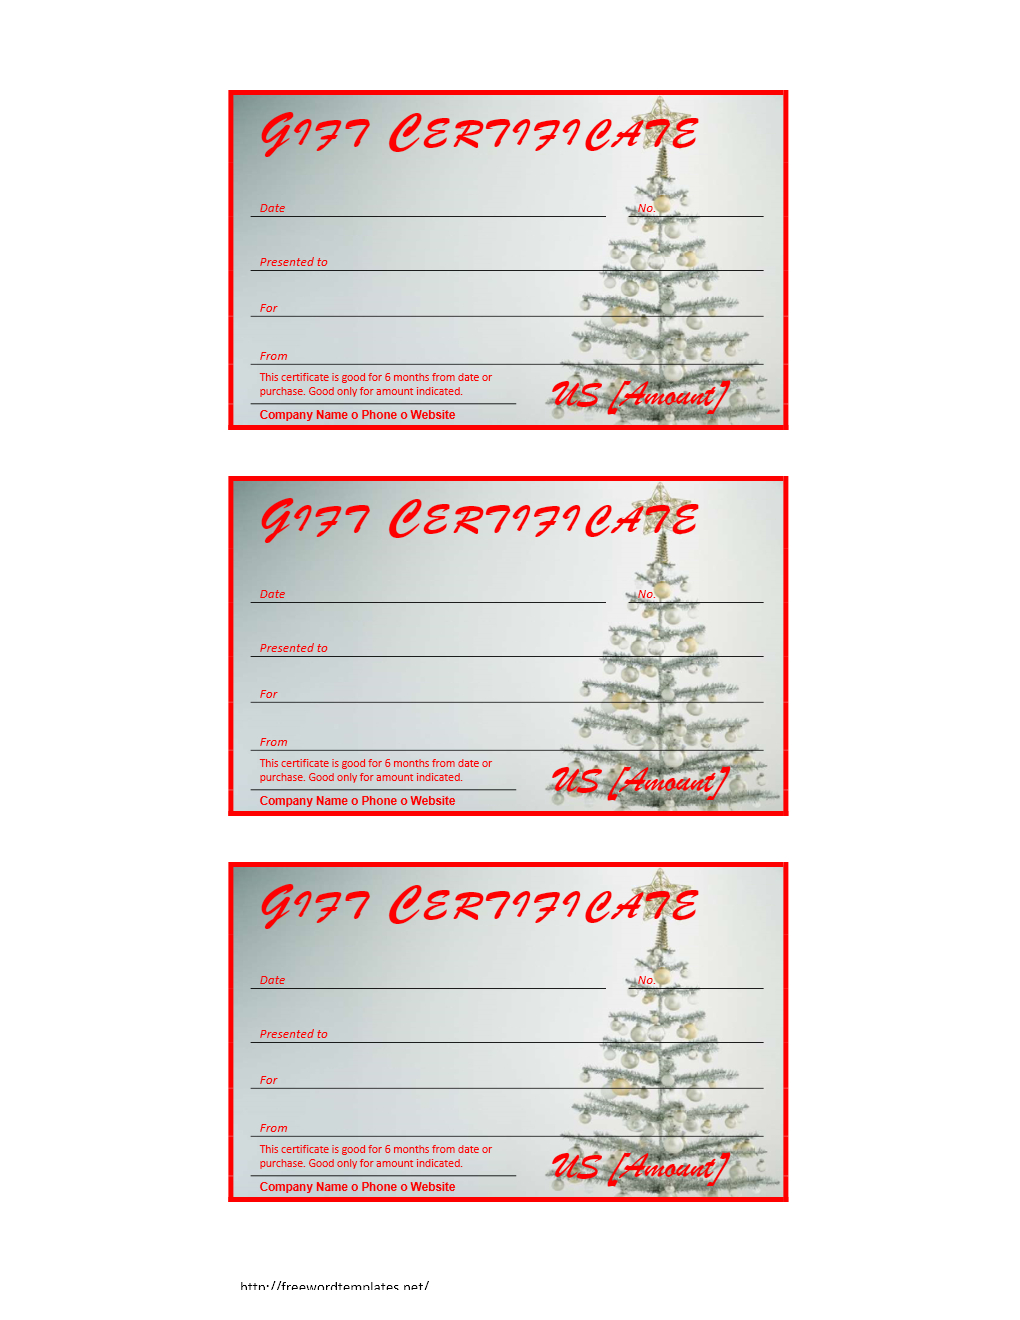 Free Gift Certificate Archives | Freewordtemplates - Free Printable Xmas Gift Certificates